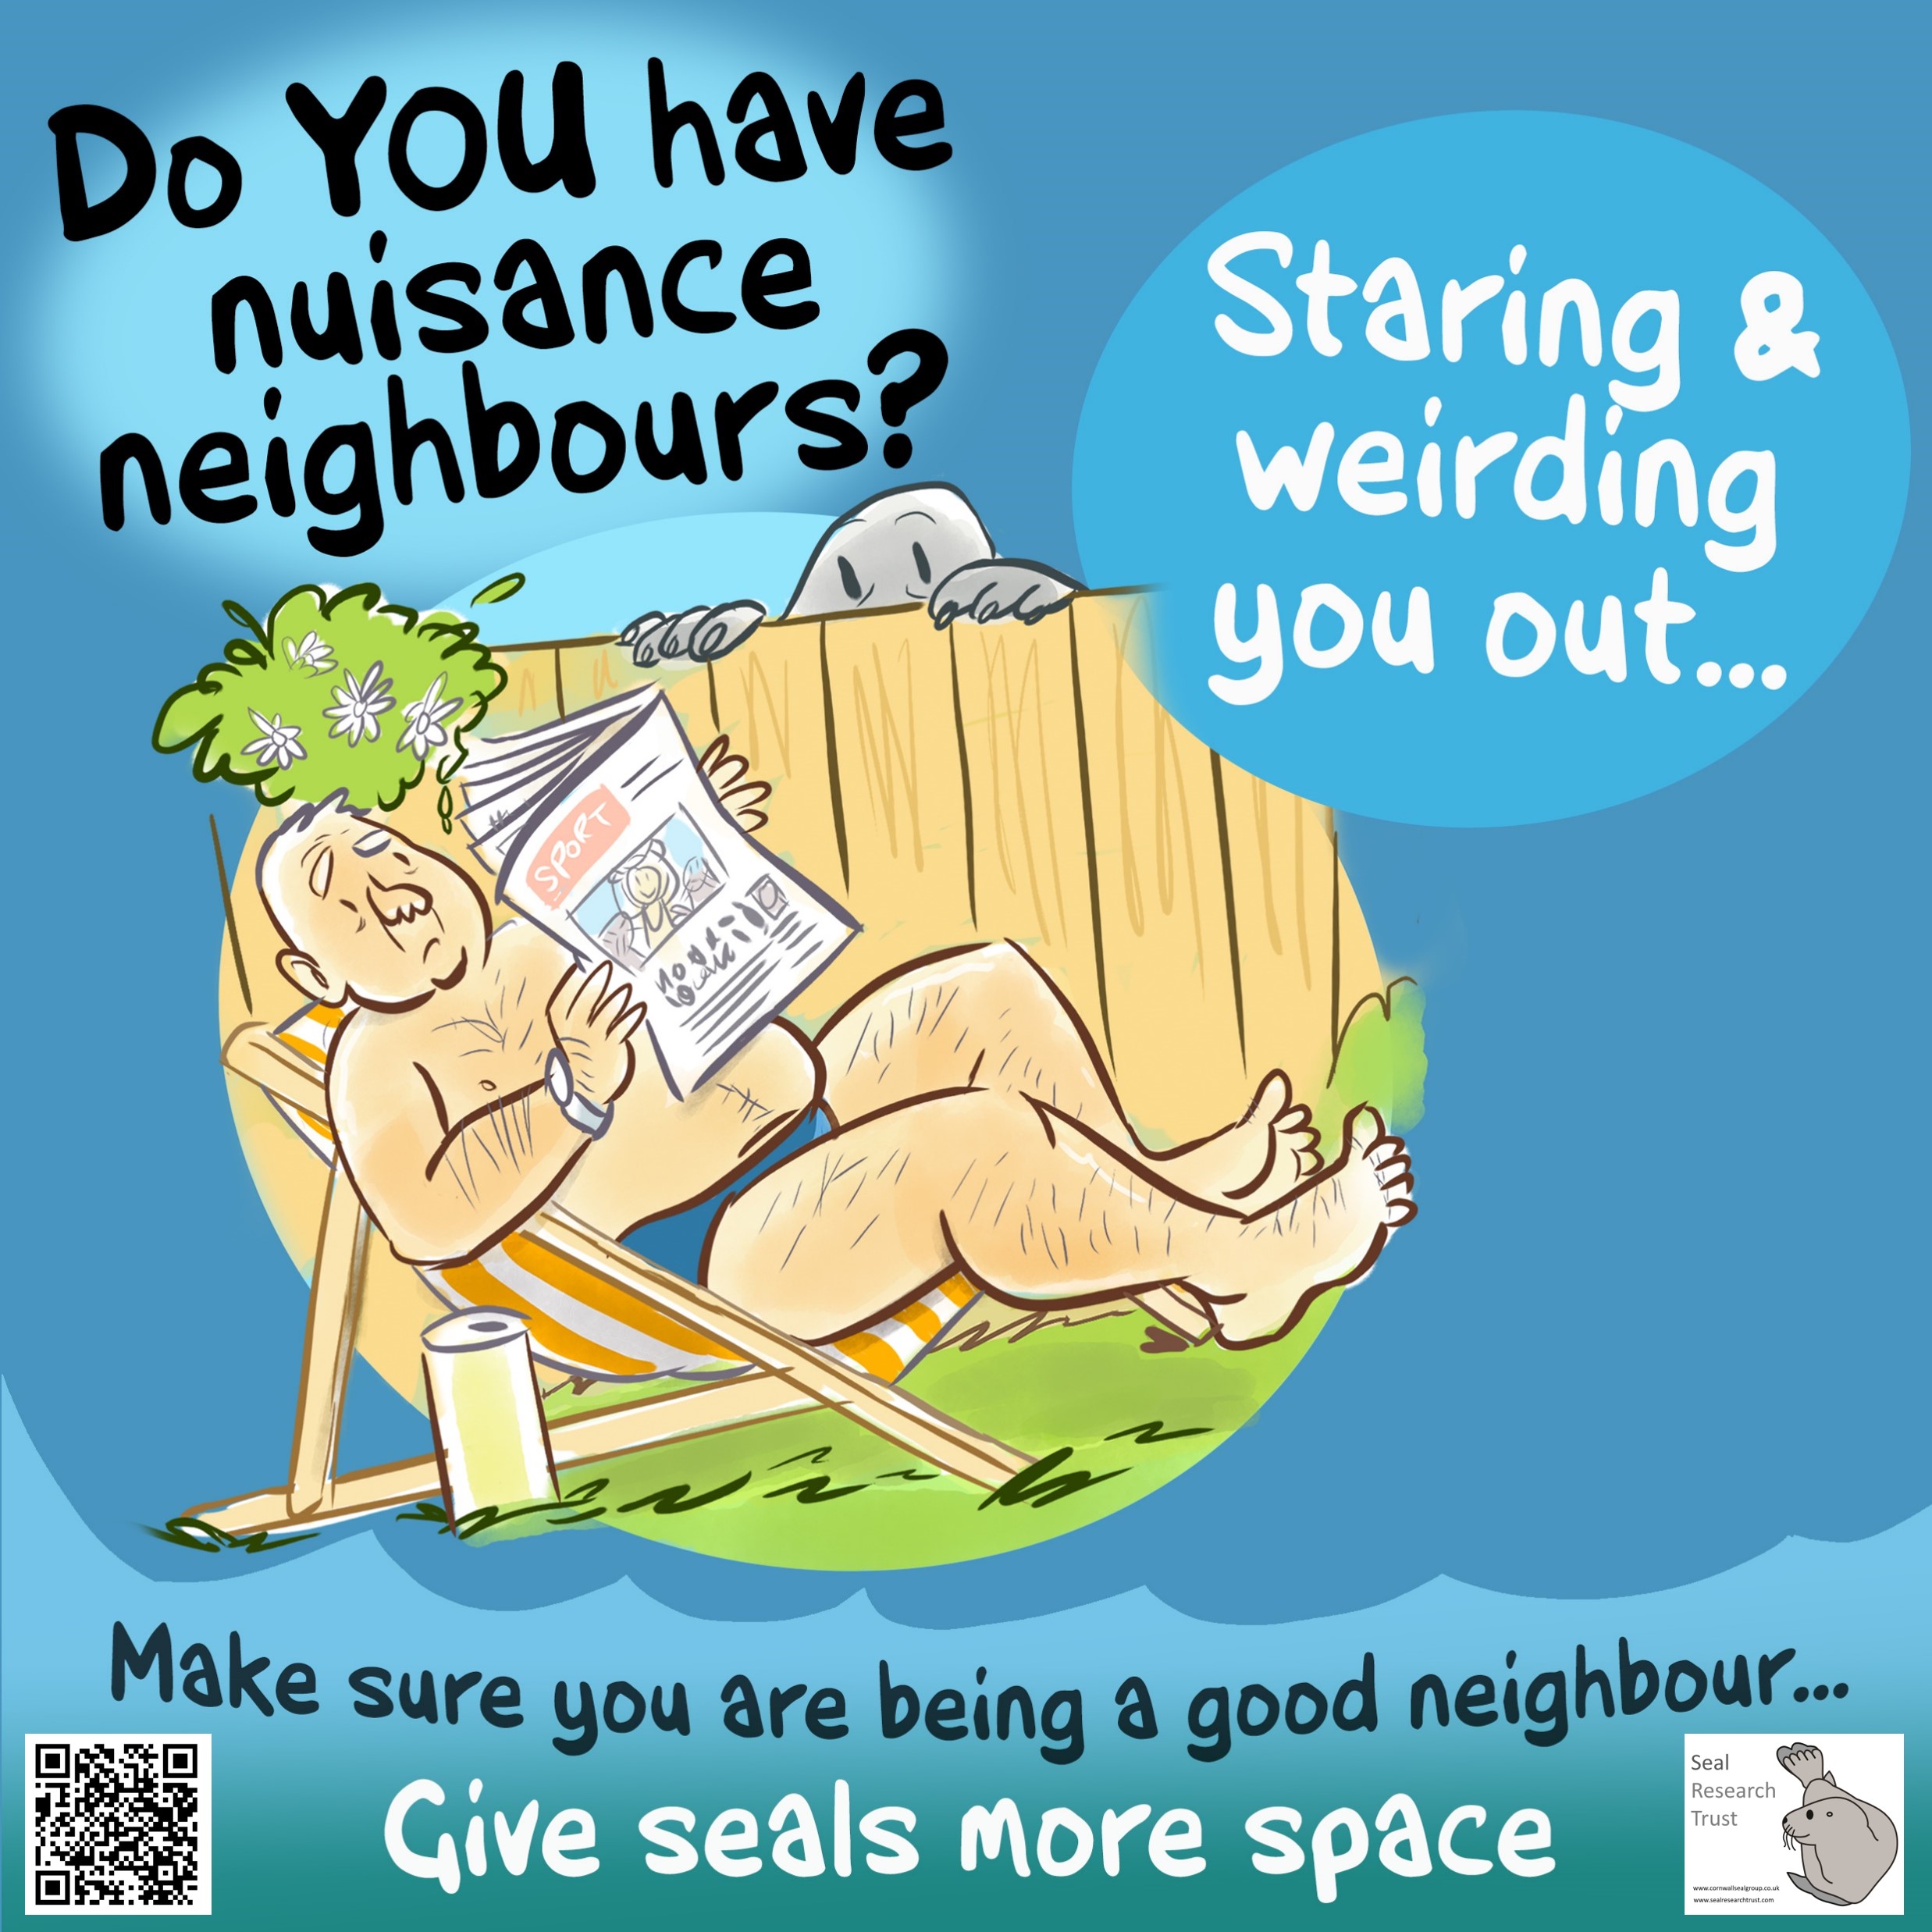 A social media graphic encouraging people to be better neighbours when it comes to staring at seals